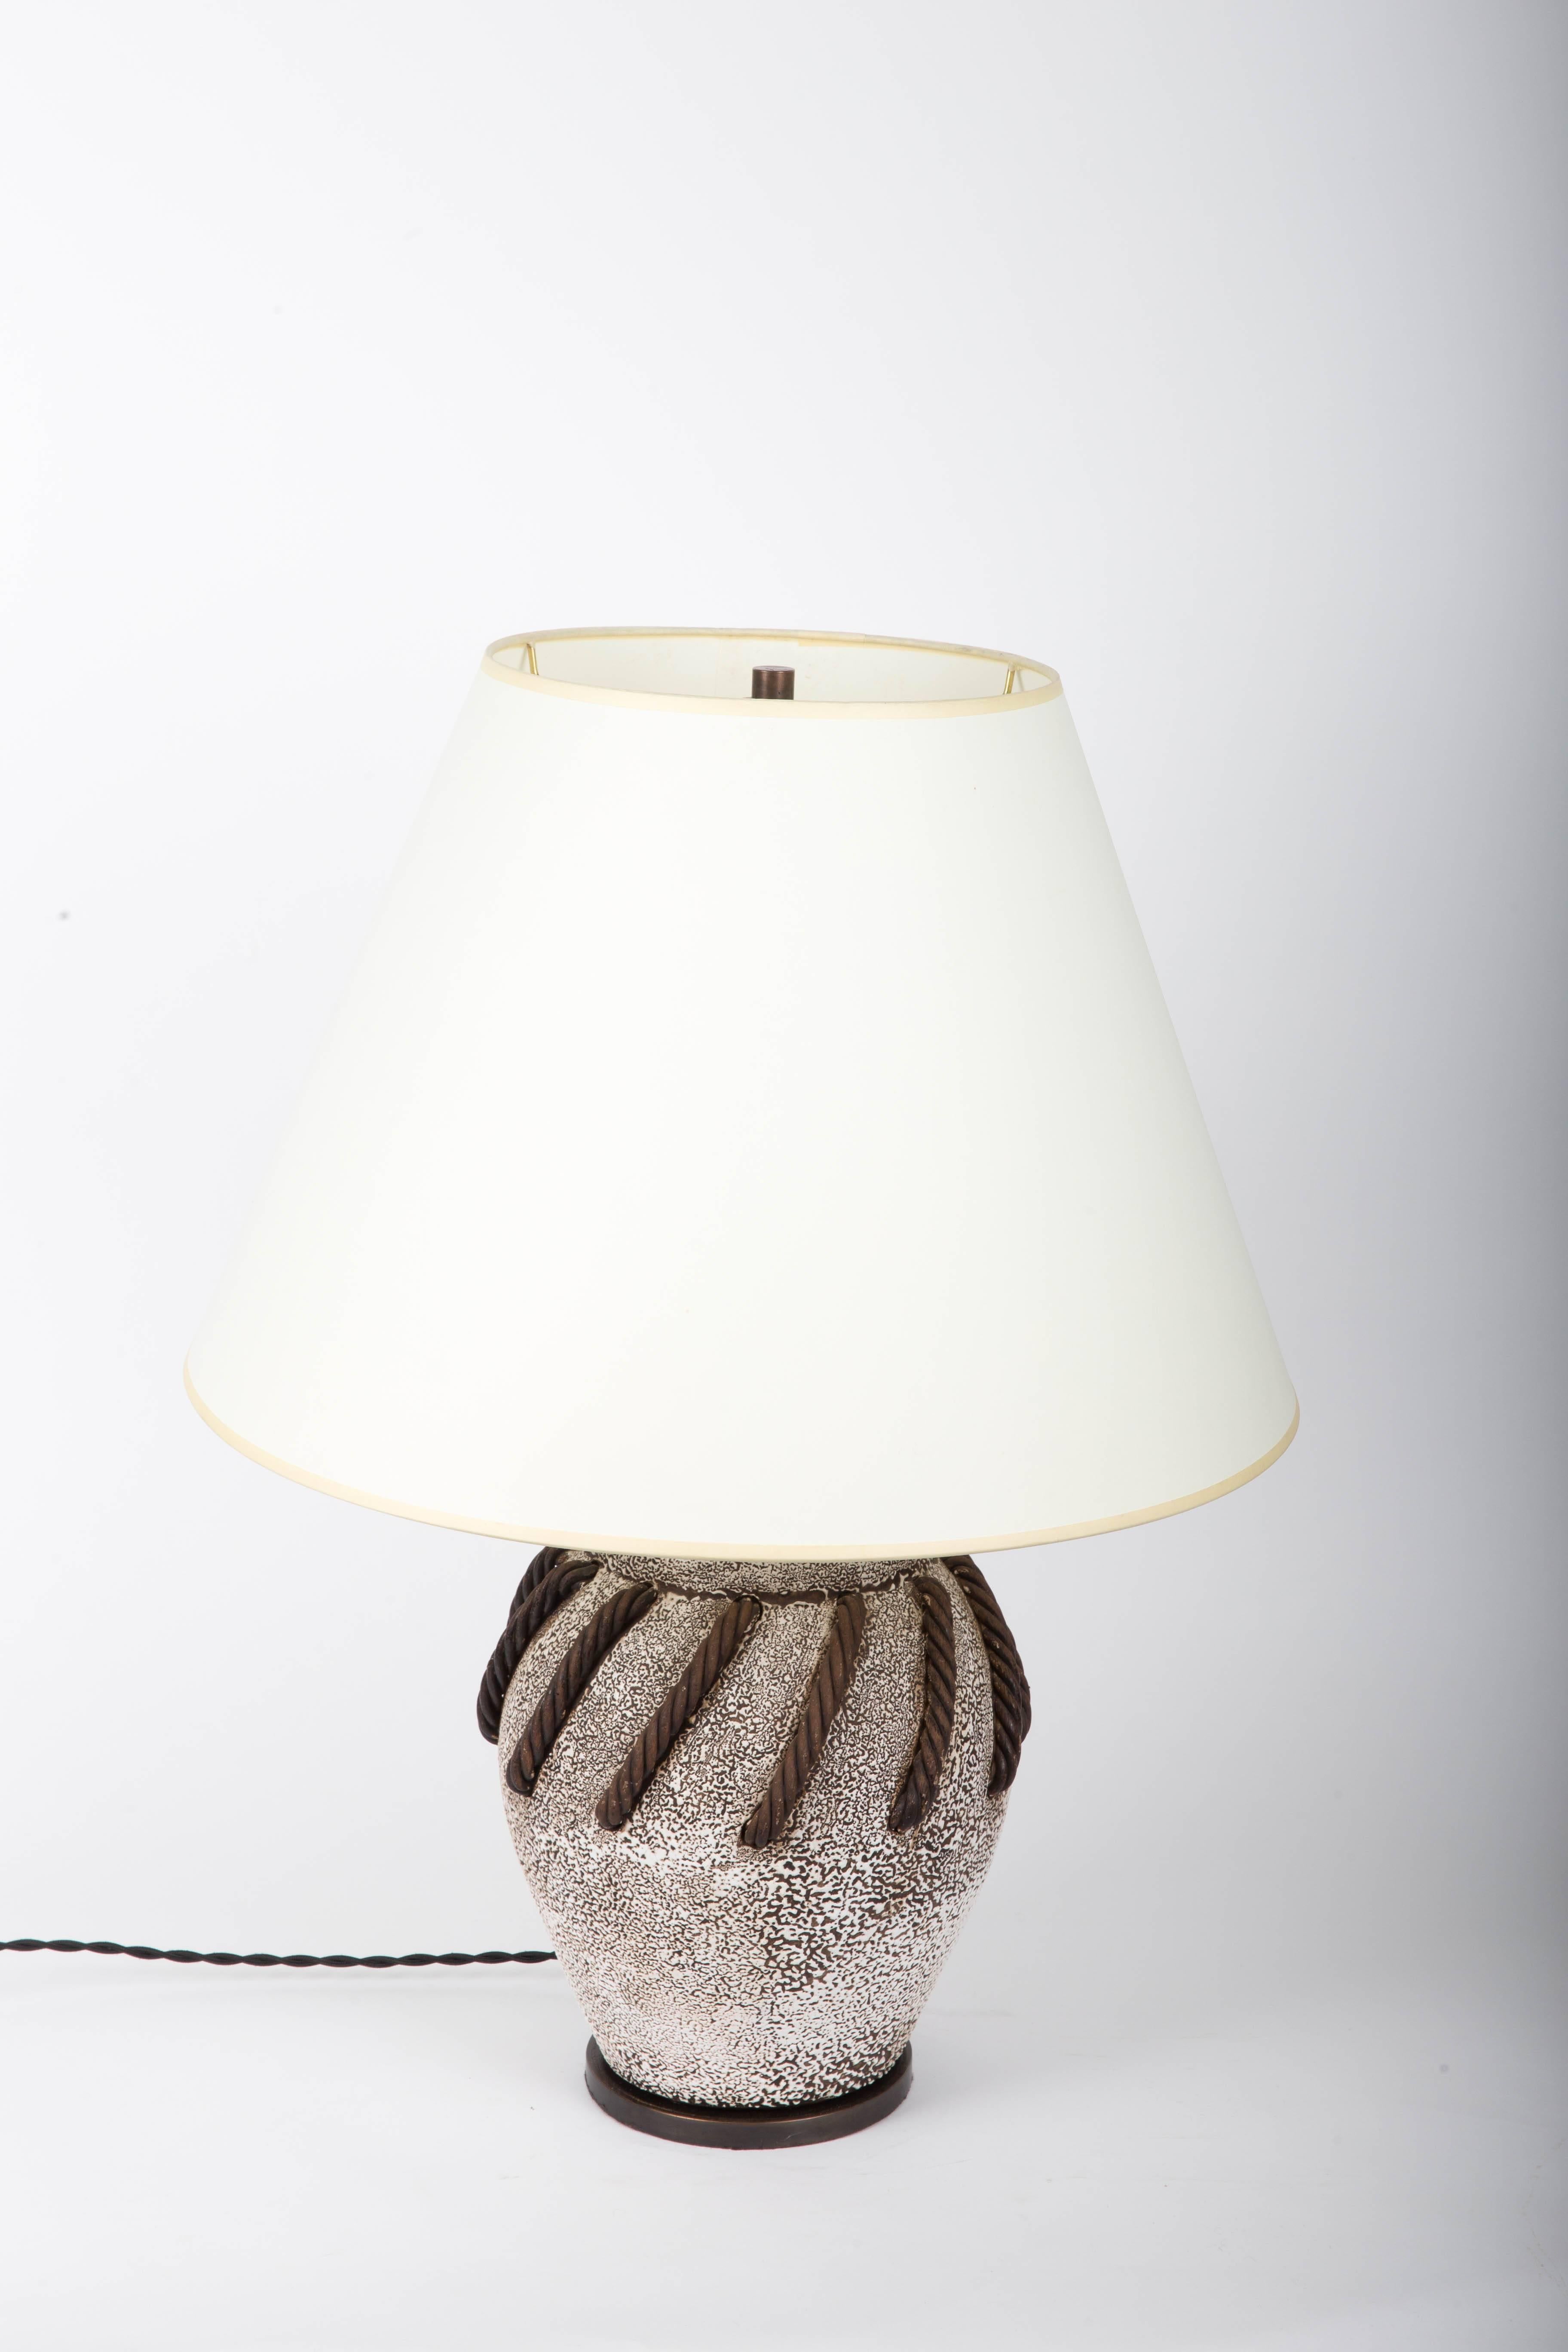 20th Century Textured Brown + White Ceramic Lamp with Rope Detailing